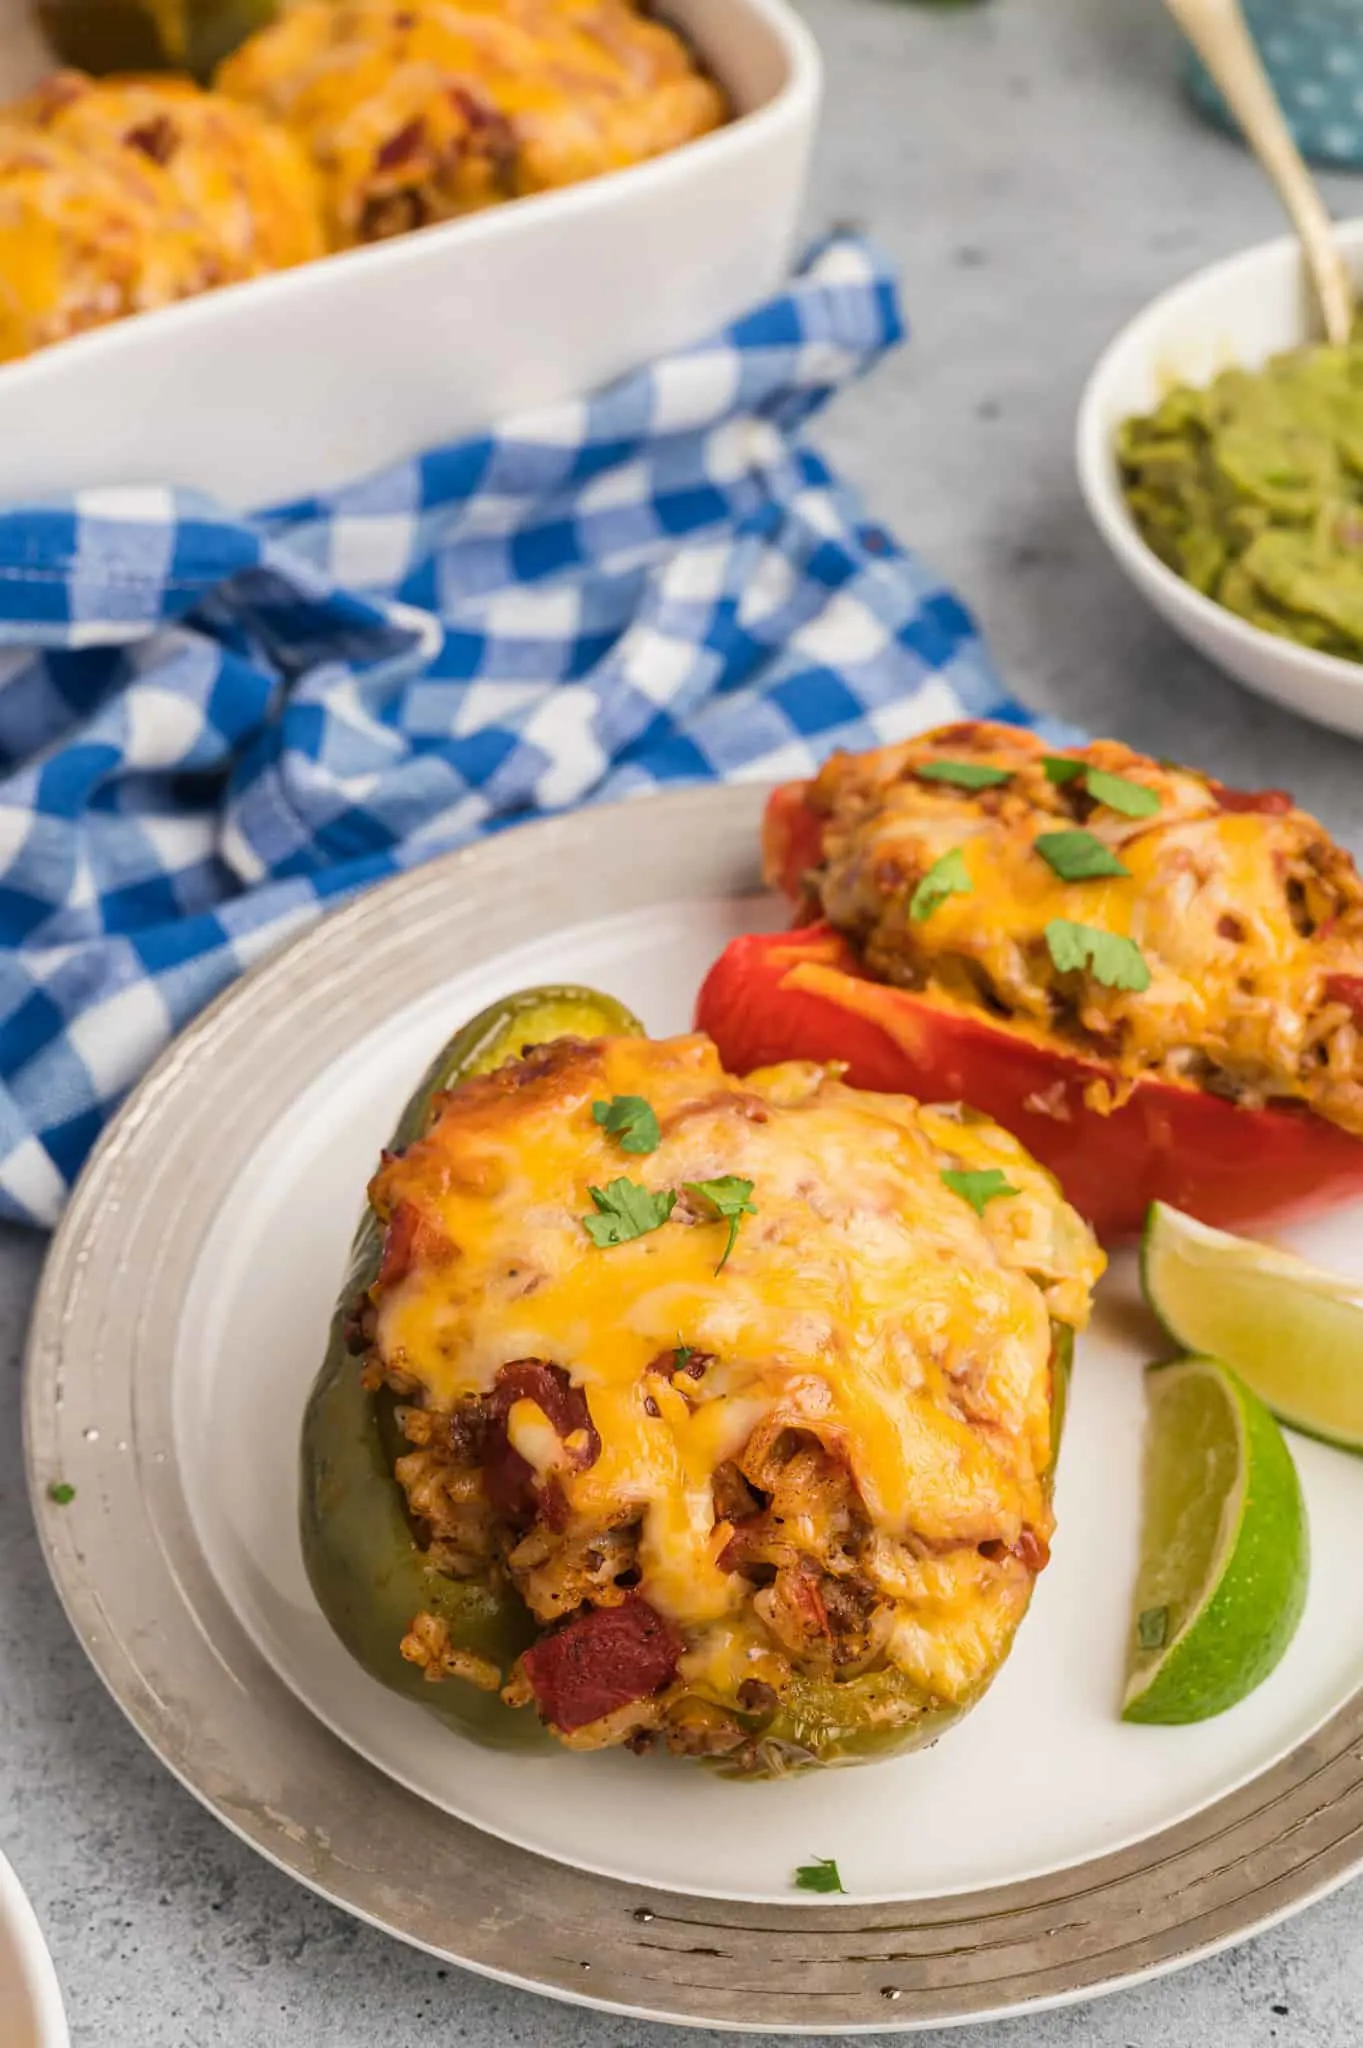 Taco Stuffed Peppers are an easy weeknight dinner recipe made with bell peppers stuffed with a ground beef, rice and taco sauce mixture and baked with cheese on top.